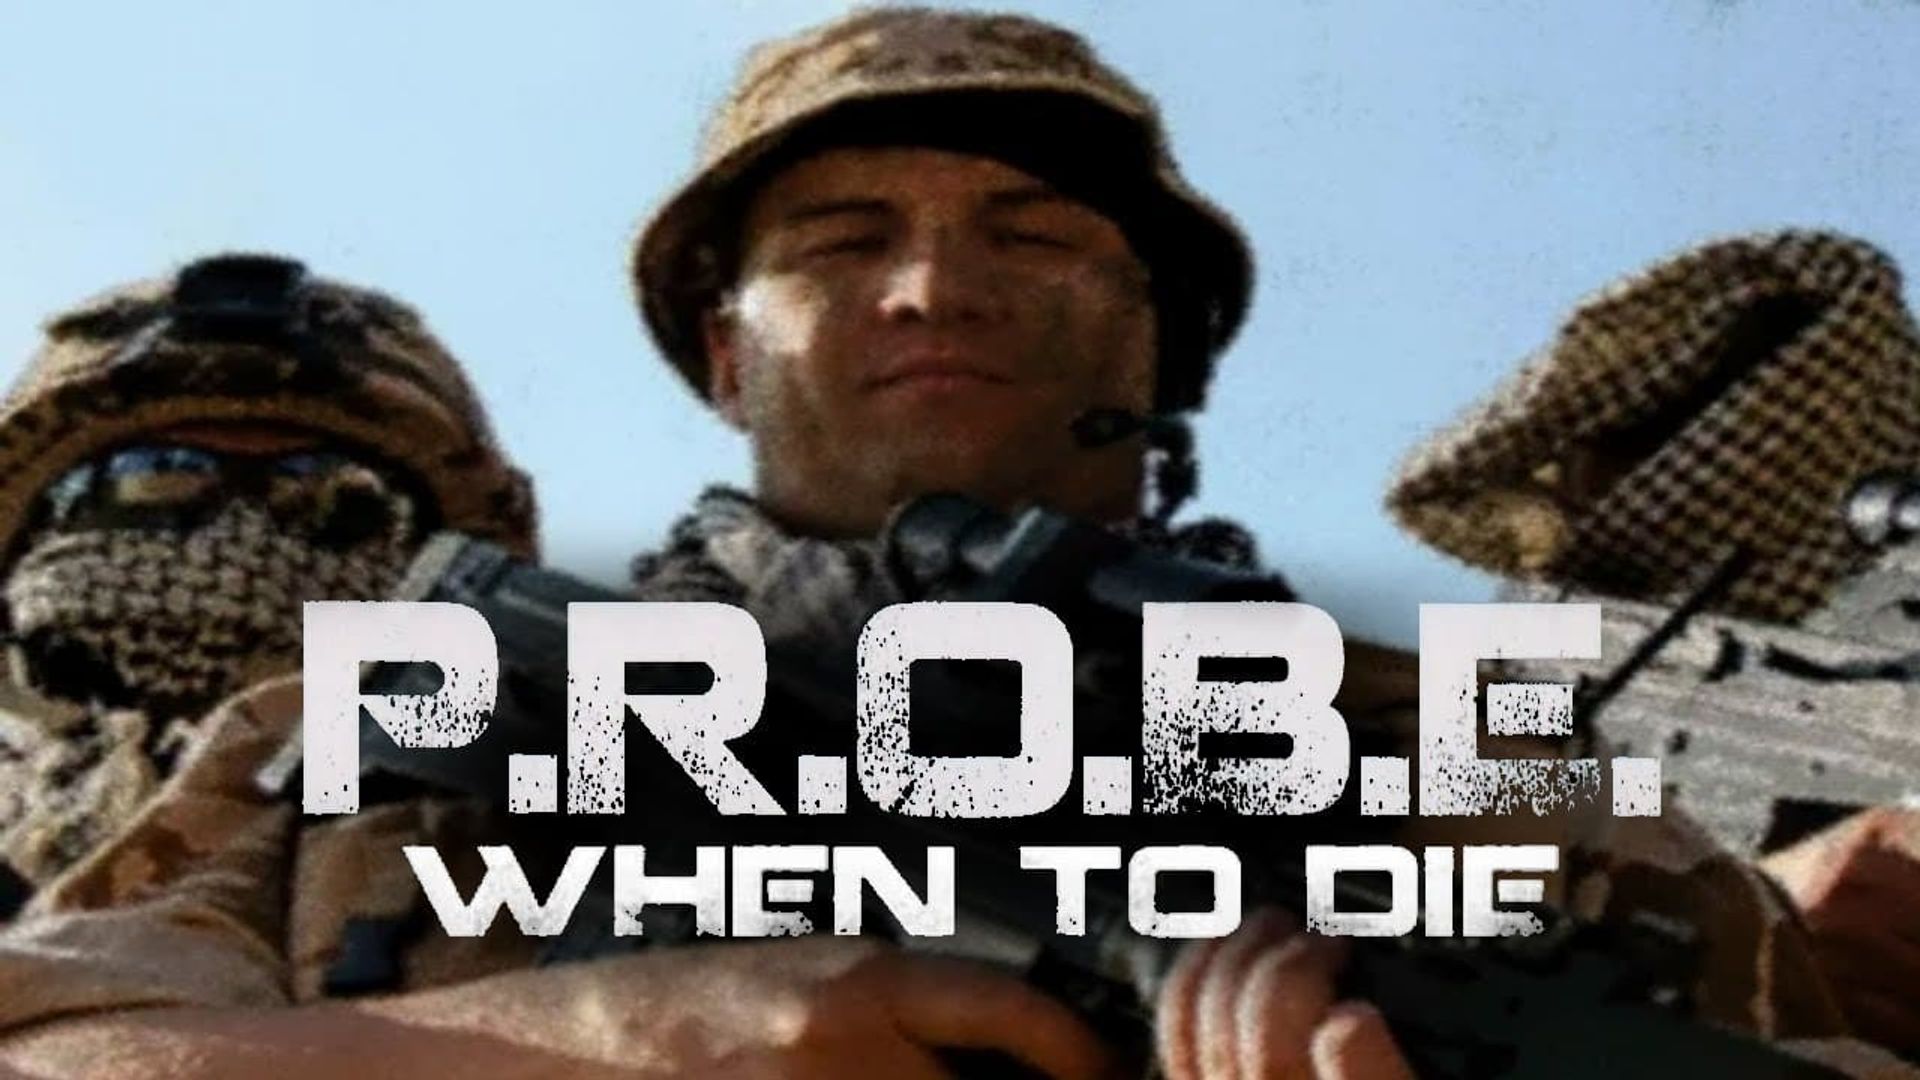 P.R.O.B.E.: When to Die background